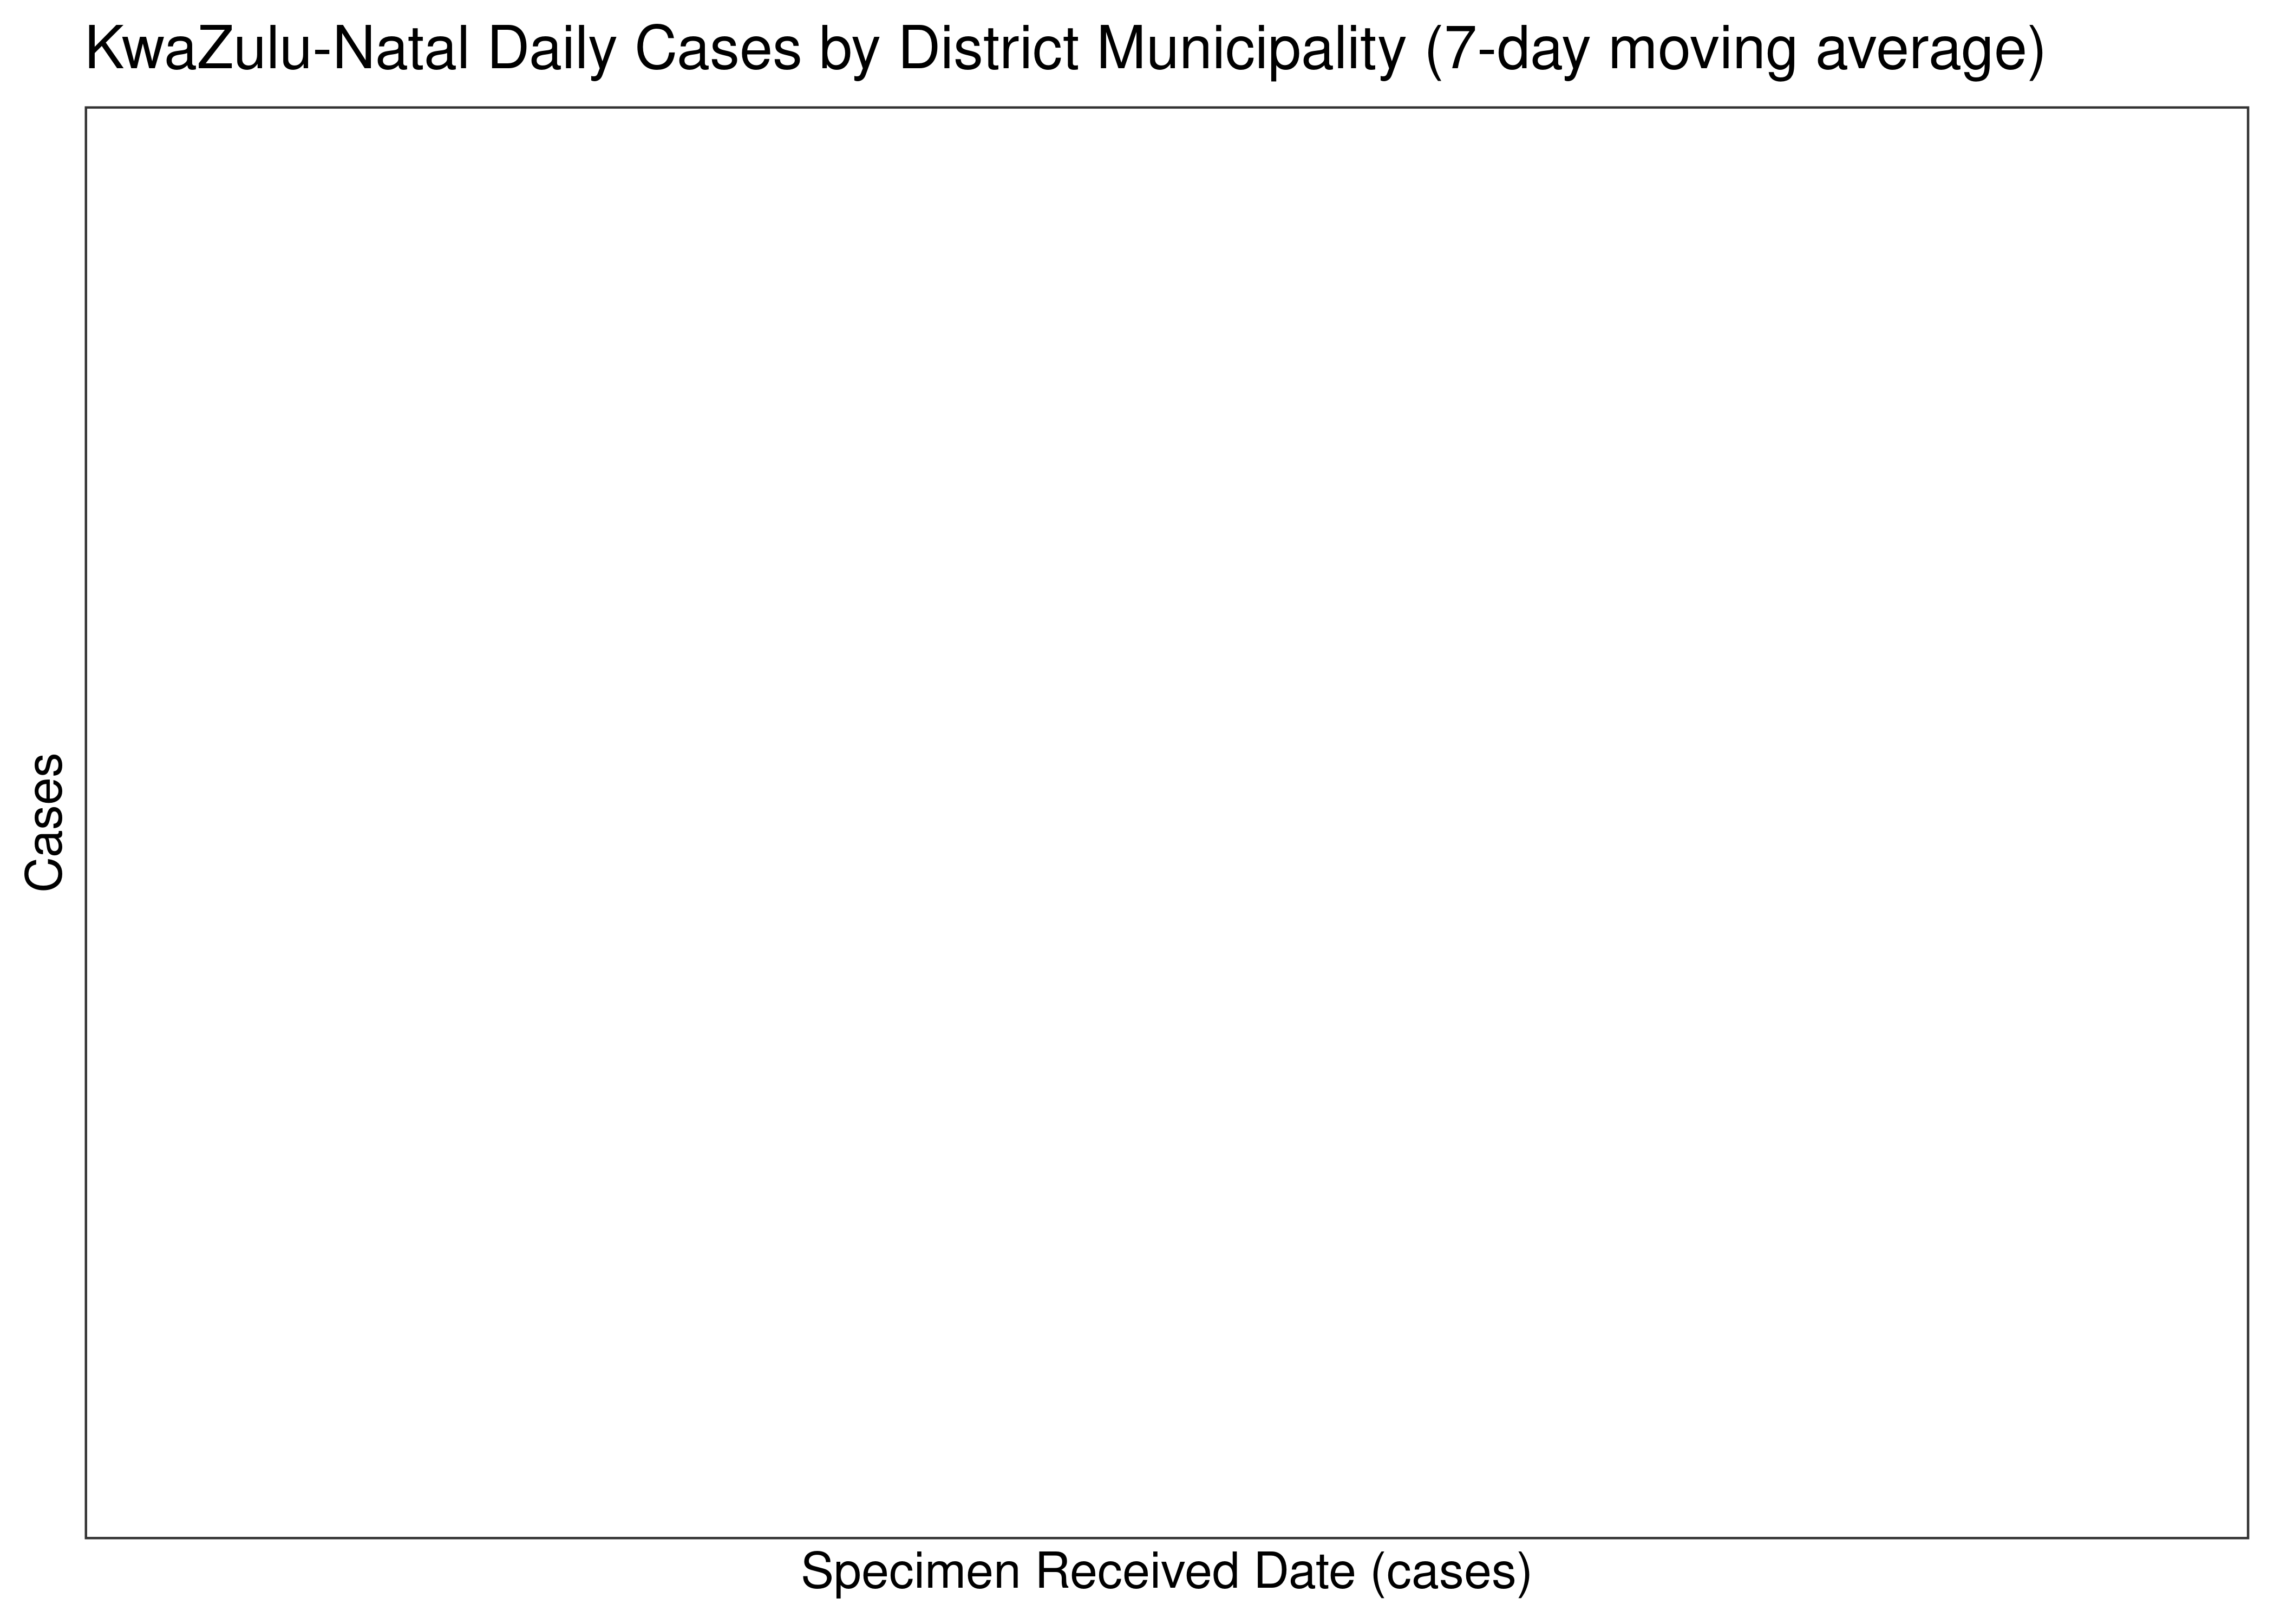 KwaZulu-Natal Daily Cases for Last 30-days by District Municipality (7-day moving average)